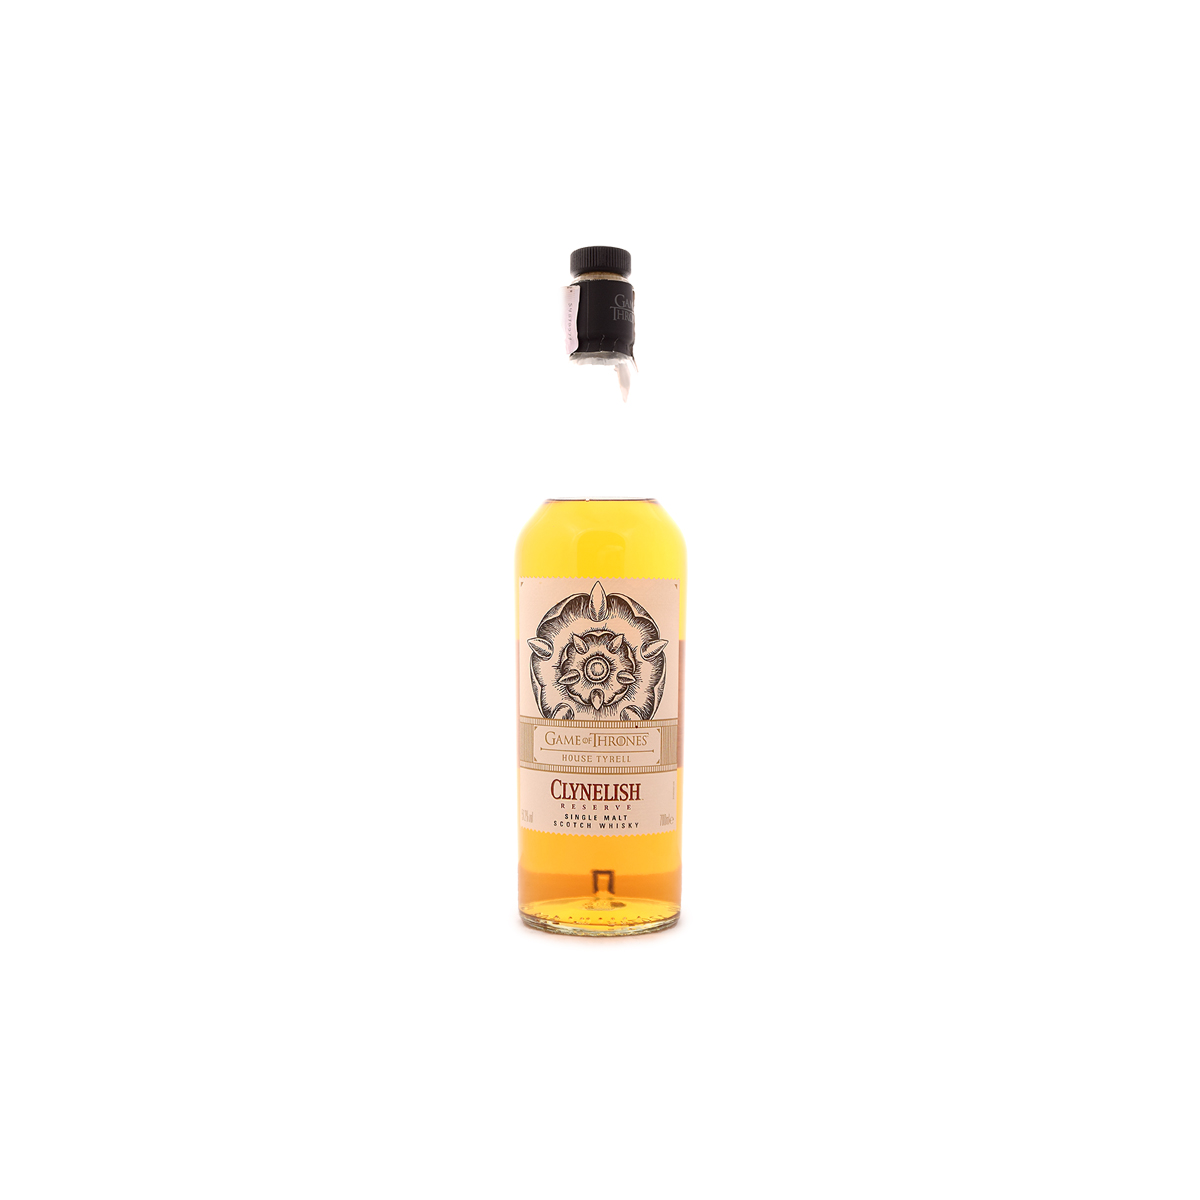 Game of Thrones House Tyrell – Clynelish Reserve (51,2%) - 30 ml.